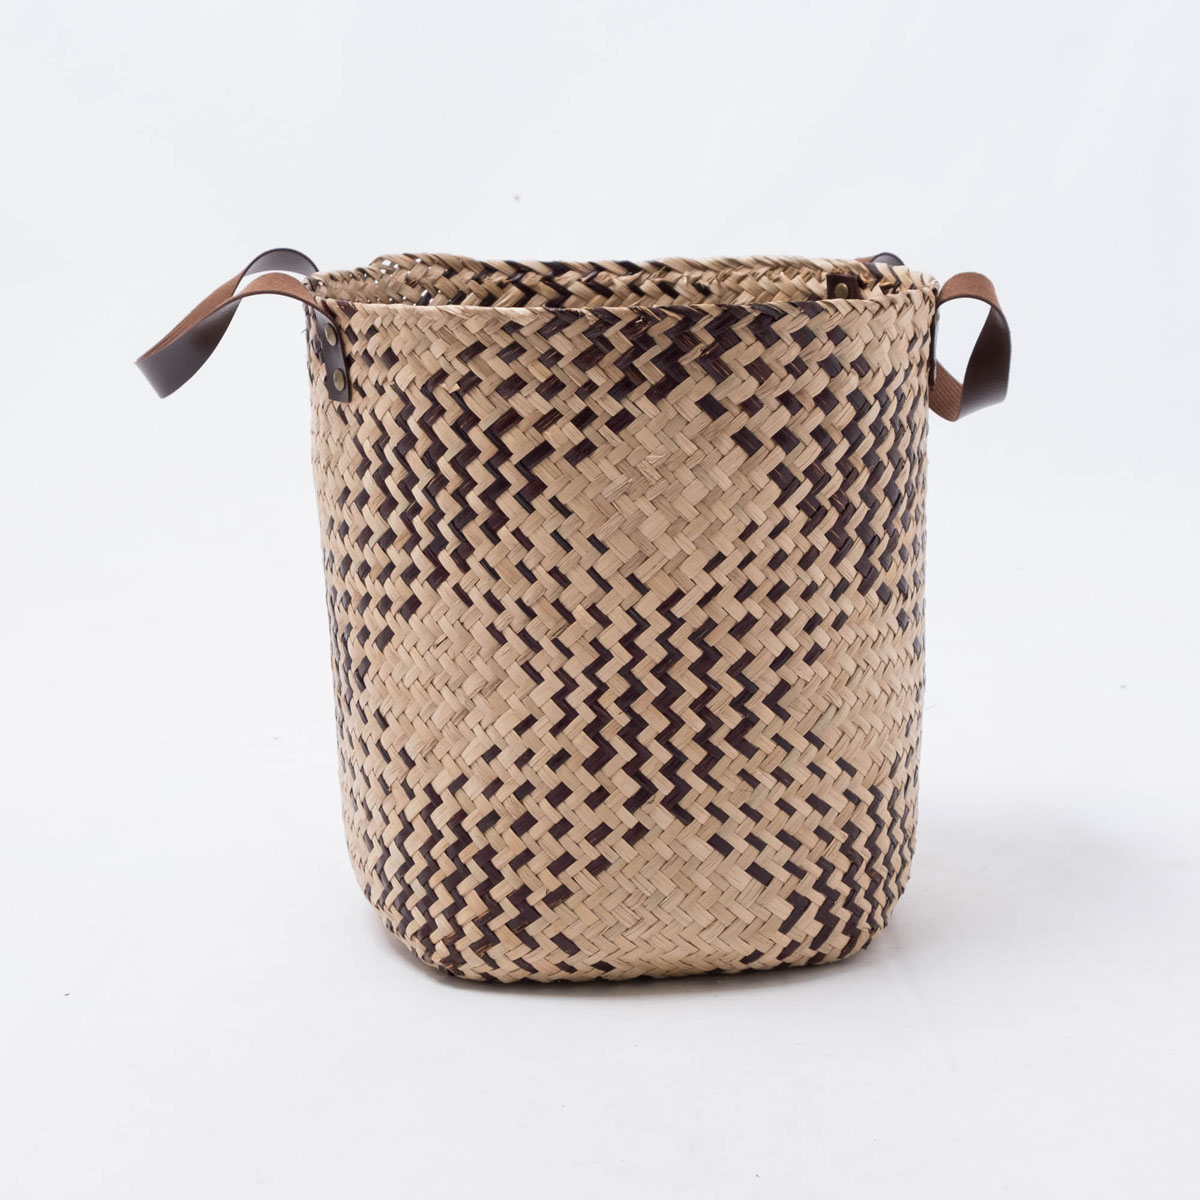 Best quality seagrass round basket seagrass laundry basket seagrass plant basket SG 06 05 432 01